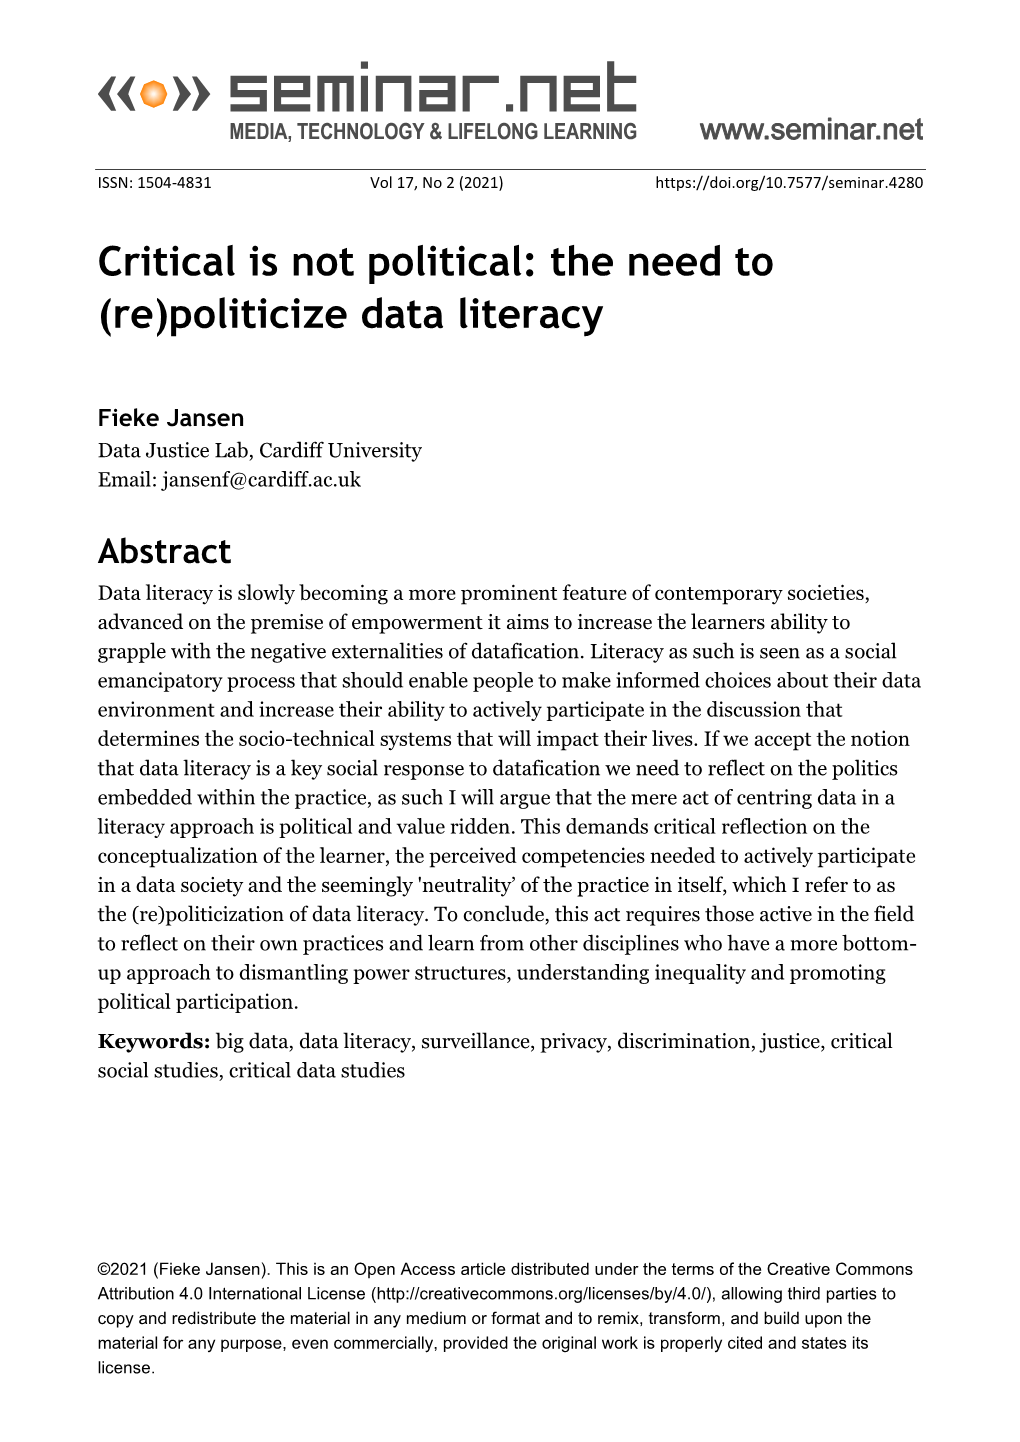 Critical Is Not Political: the Need to (Re)Politicize Data Literacy